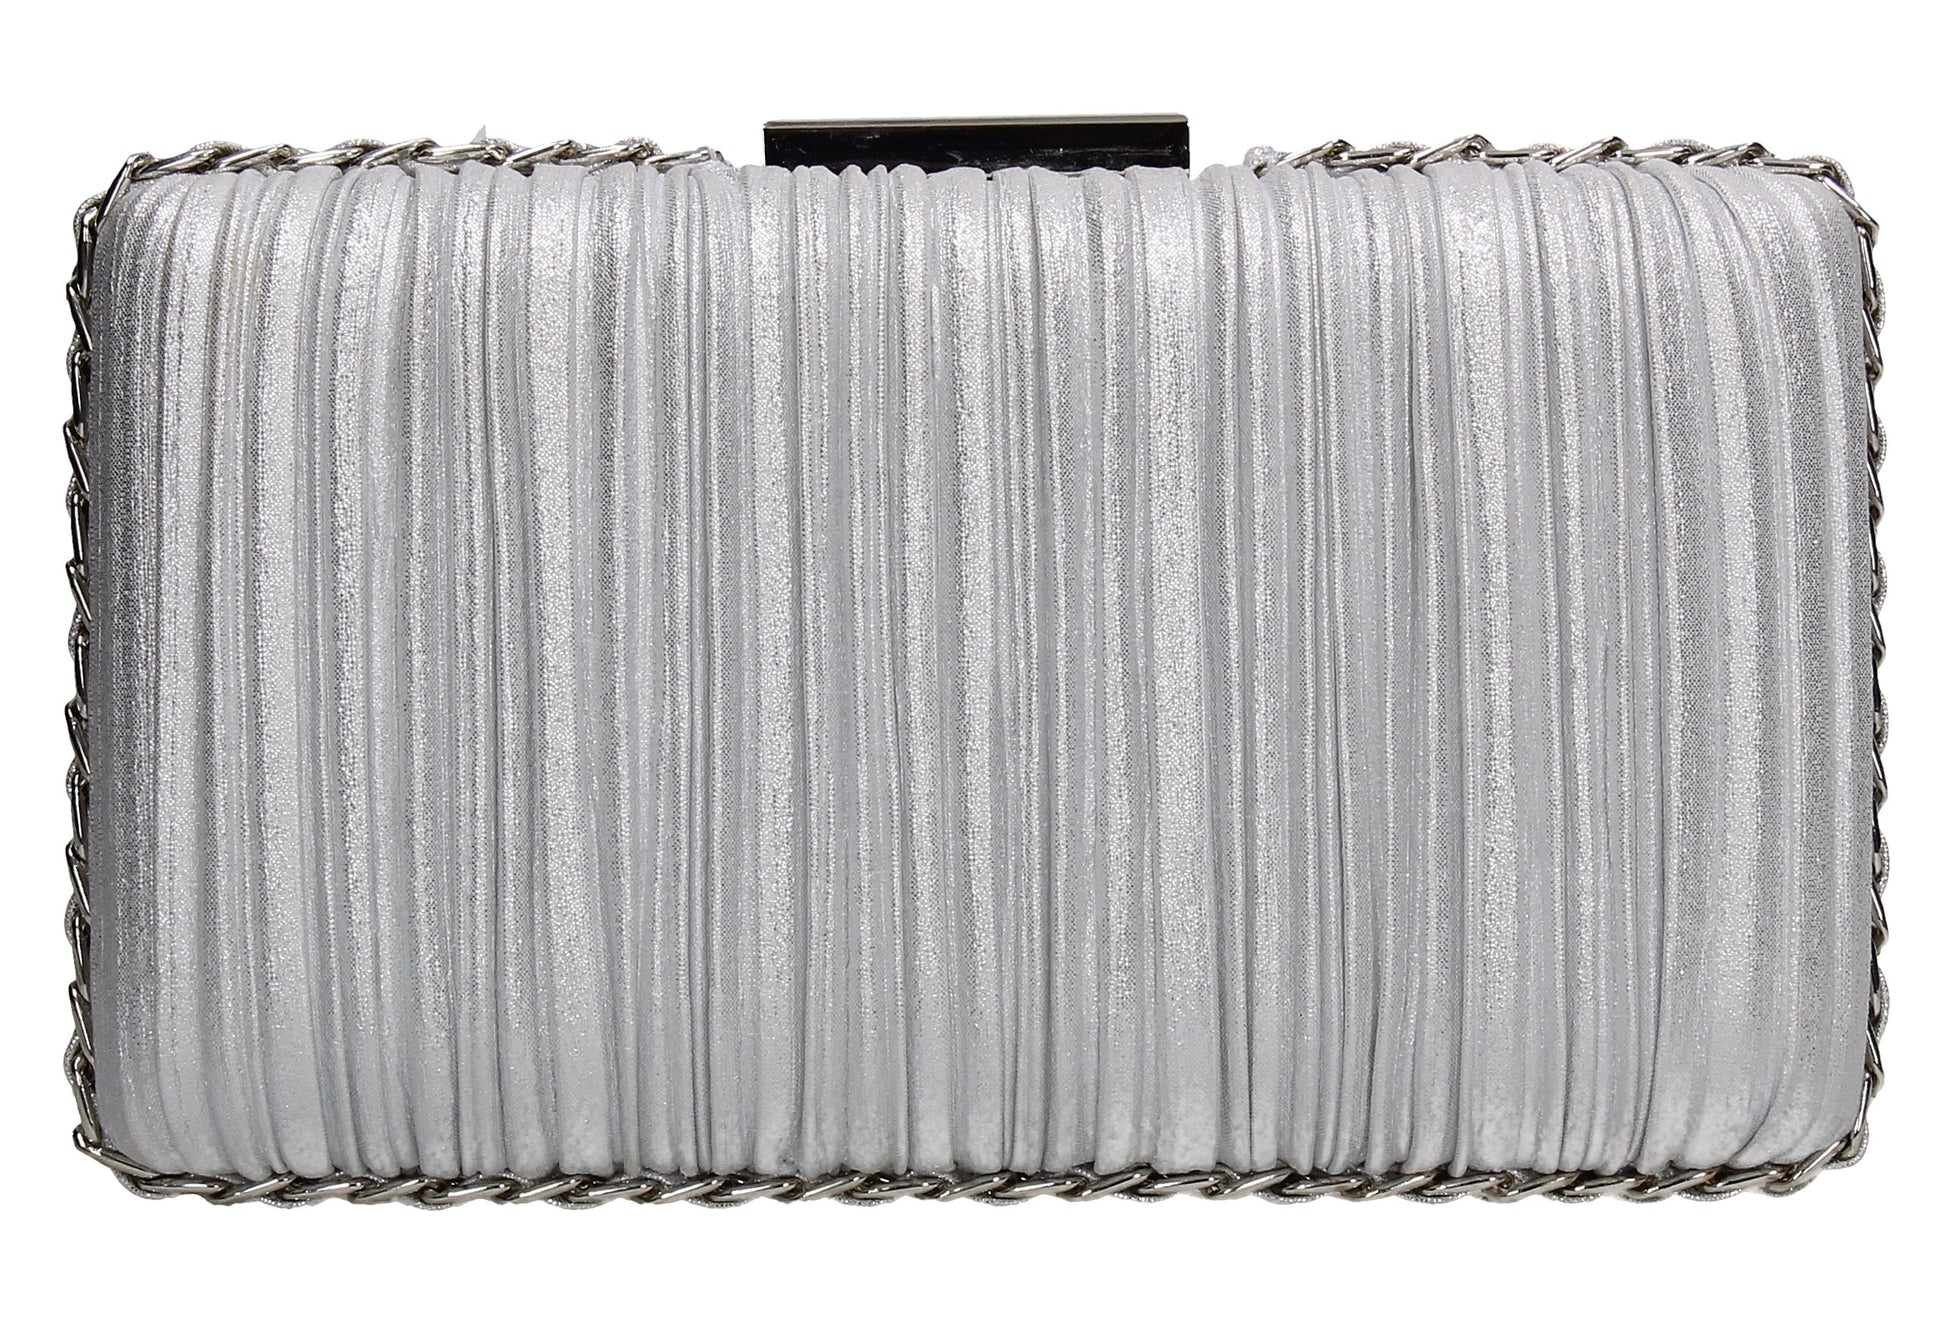 SWANKYSWANS Lacey Chain Clutch Bag Silver Cute Cheap Clutch Bag For Weddings School and Work